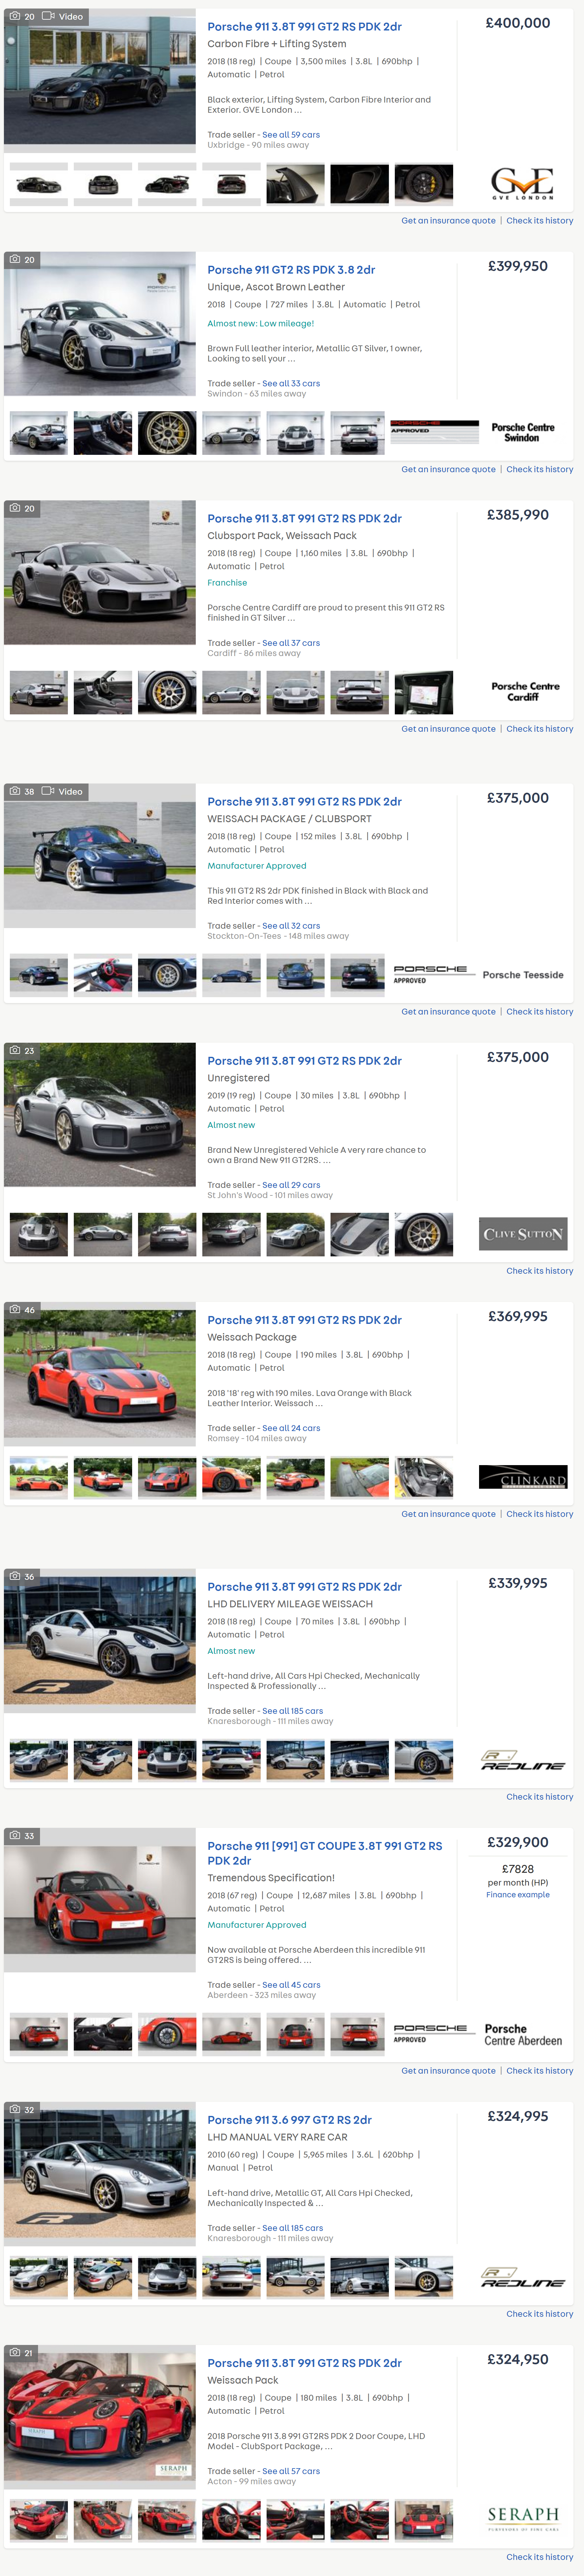 Buying Cars Concours Vehicles